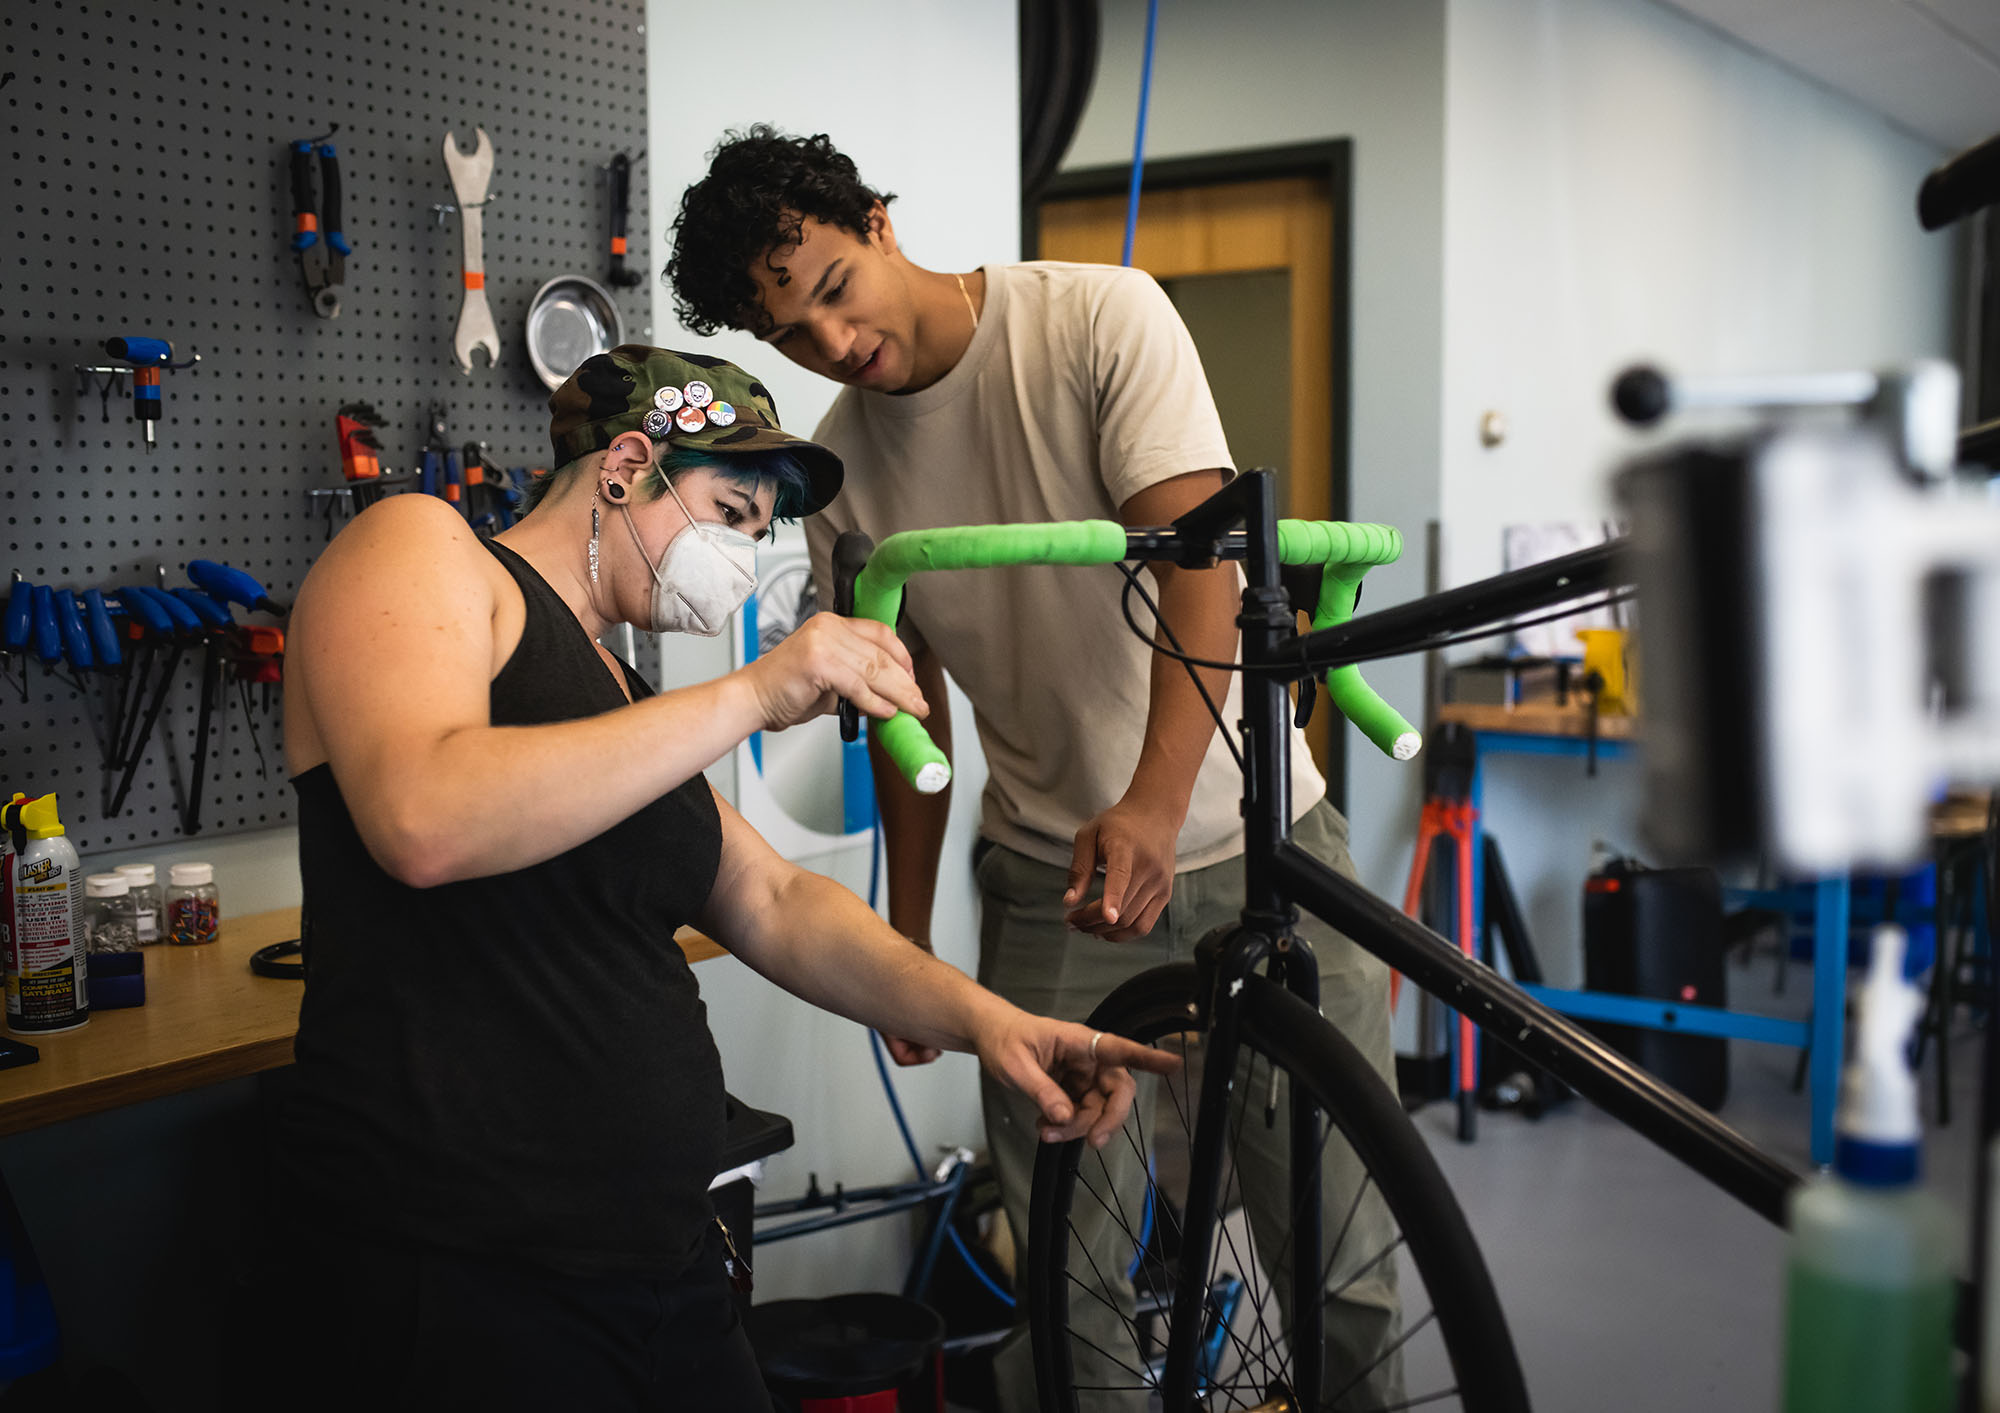 New BU Cycle Kitchen Provides DIY Bike Repair Space—and Community